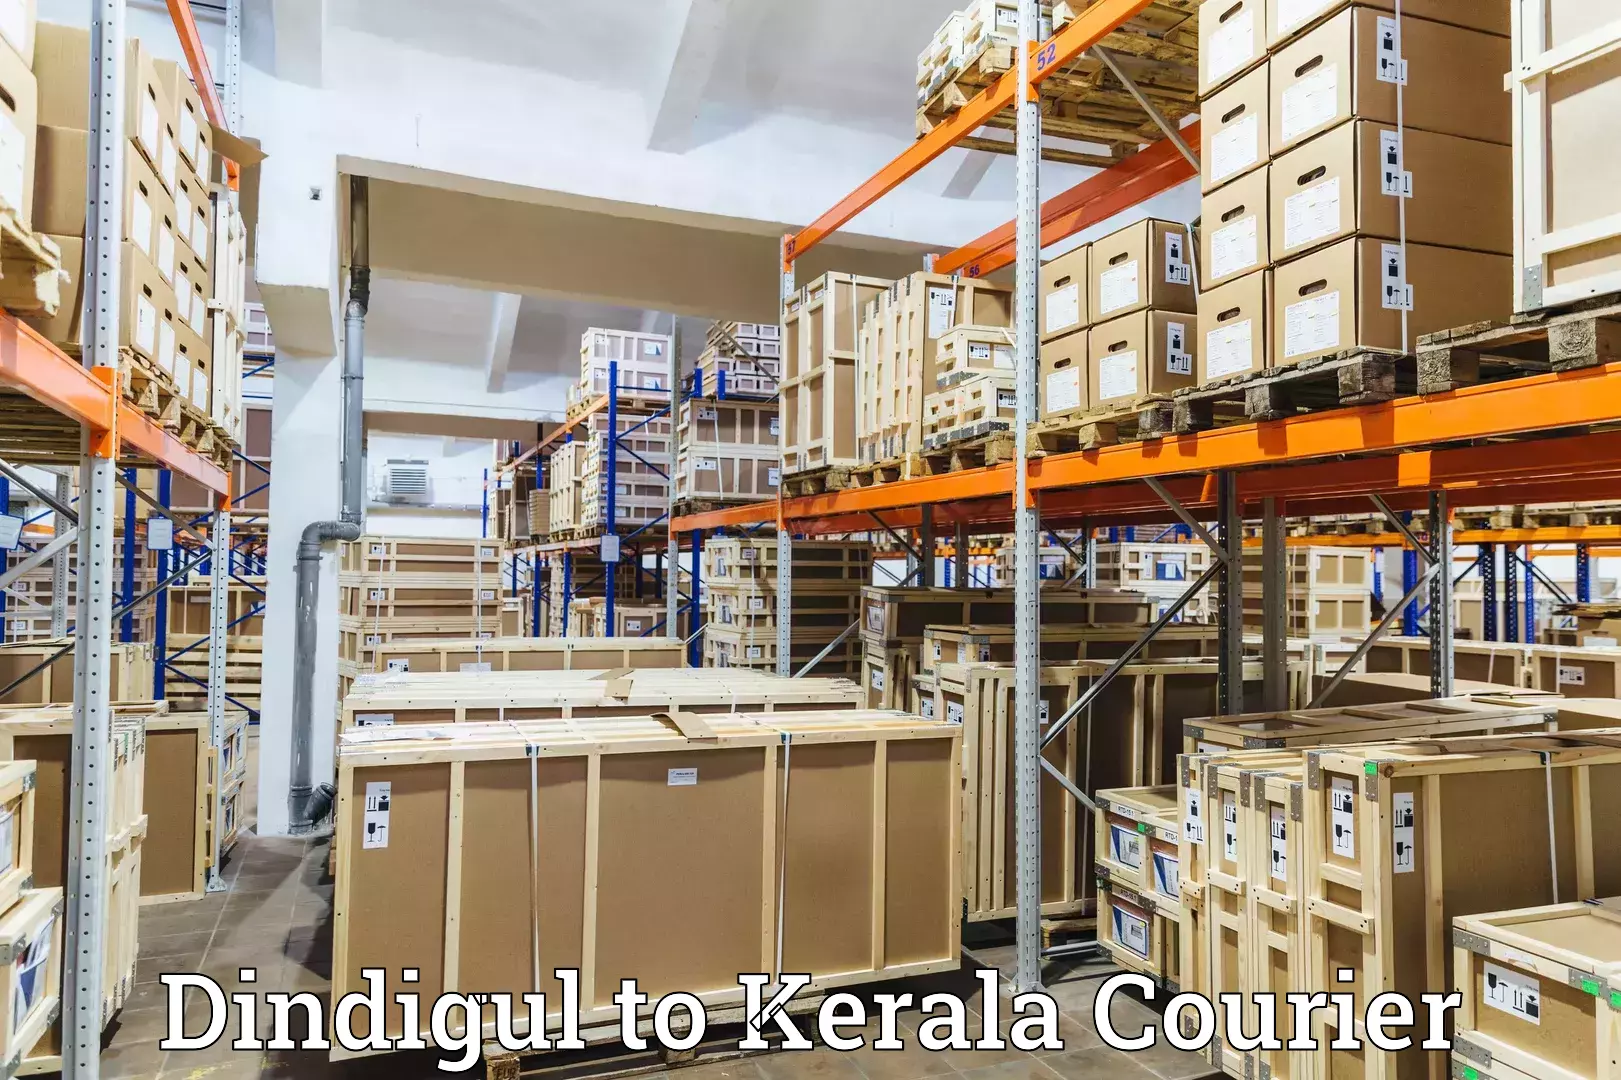 State-of-the-art courier technology in Dindigul to Kerala